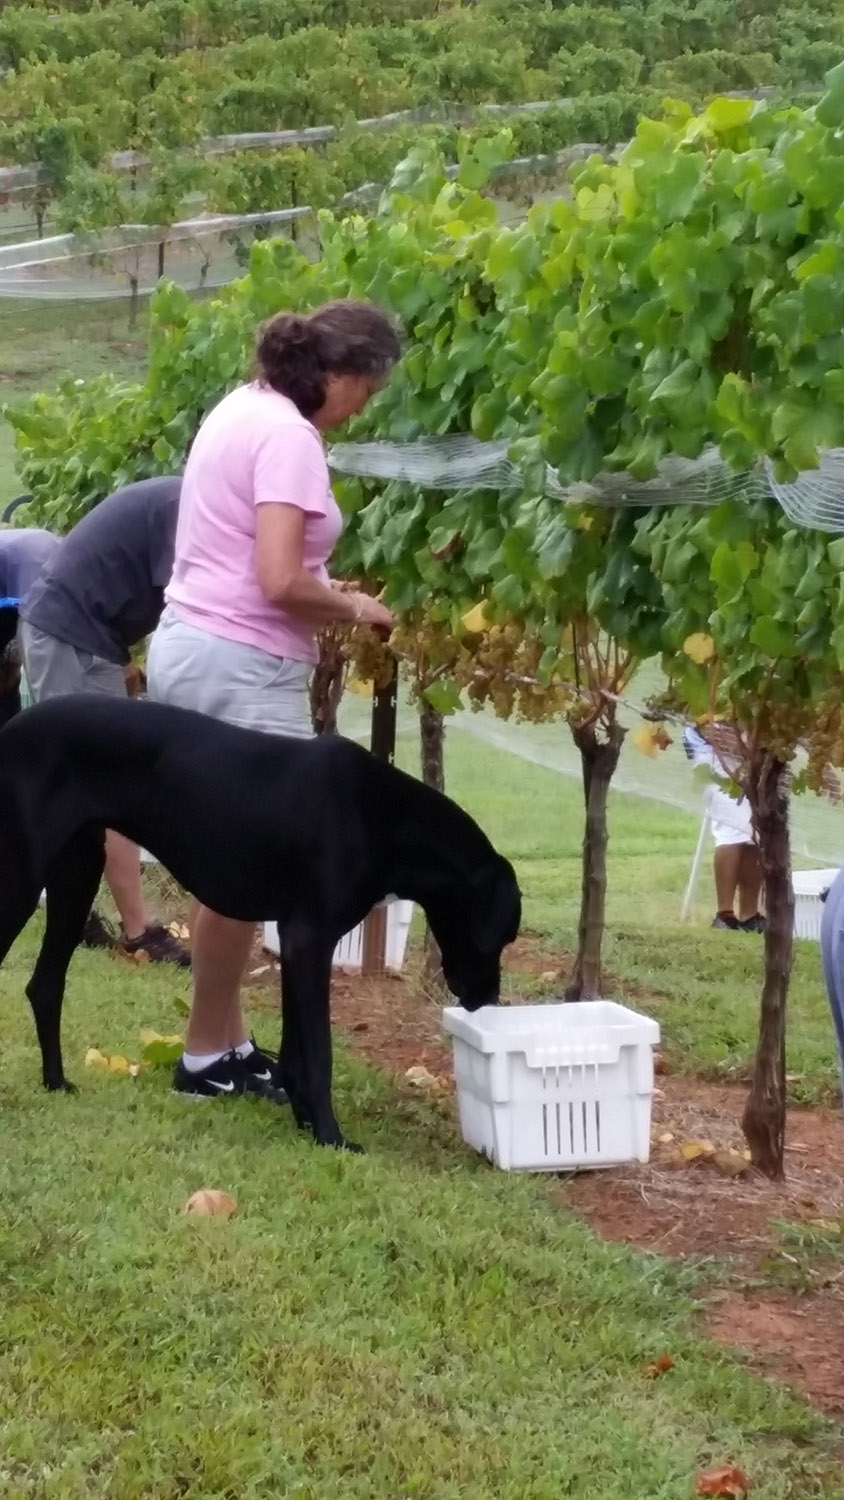 Harvesting grapes with help of dog.